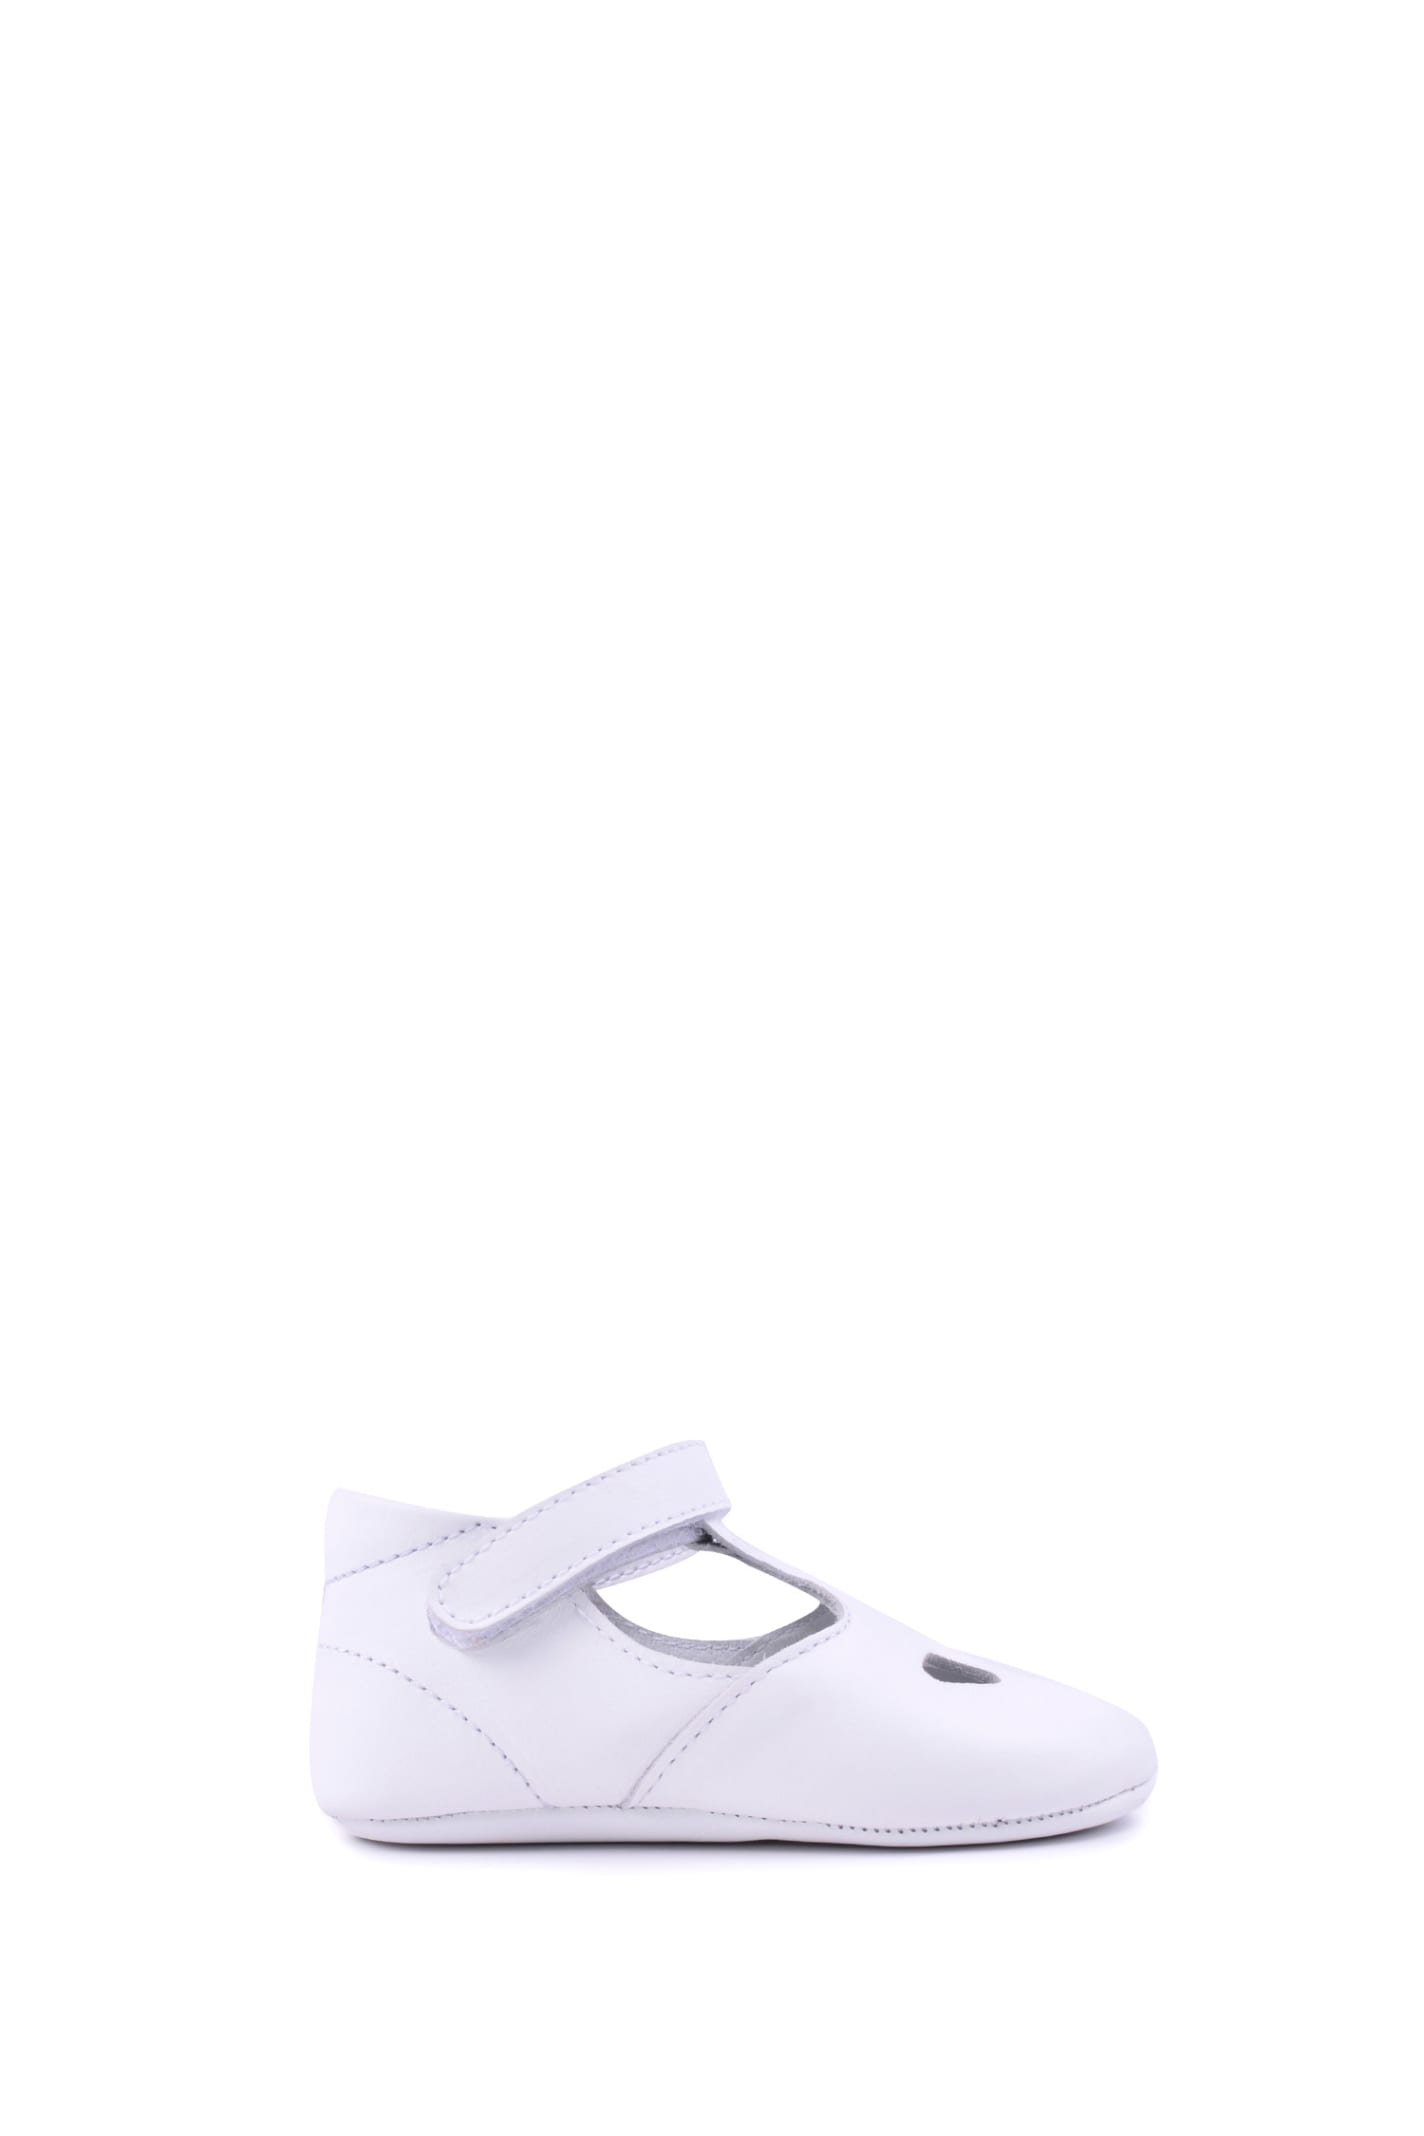 Gallucci Kids' Leather Shoes With Buckle In White